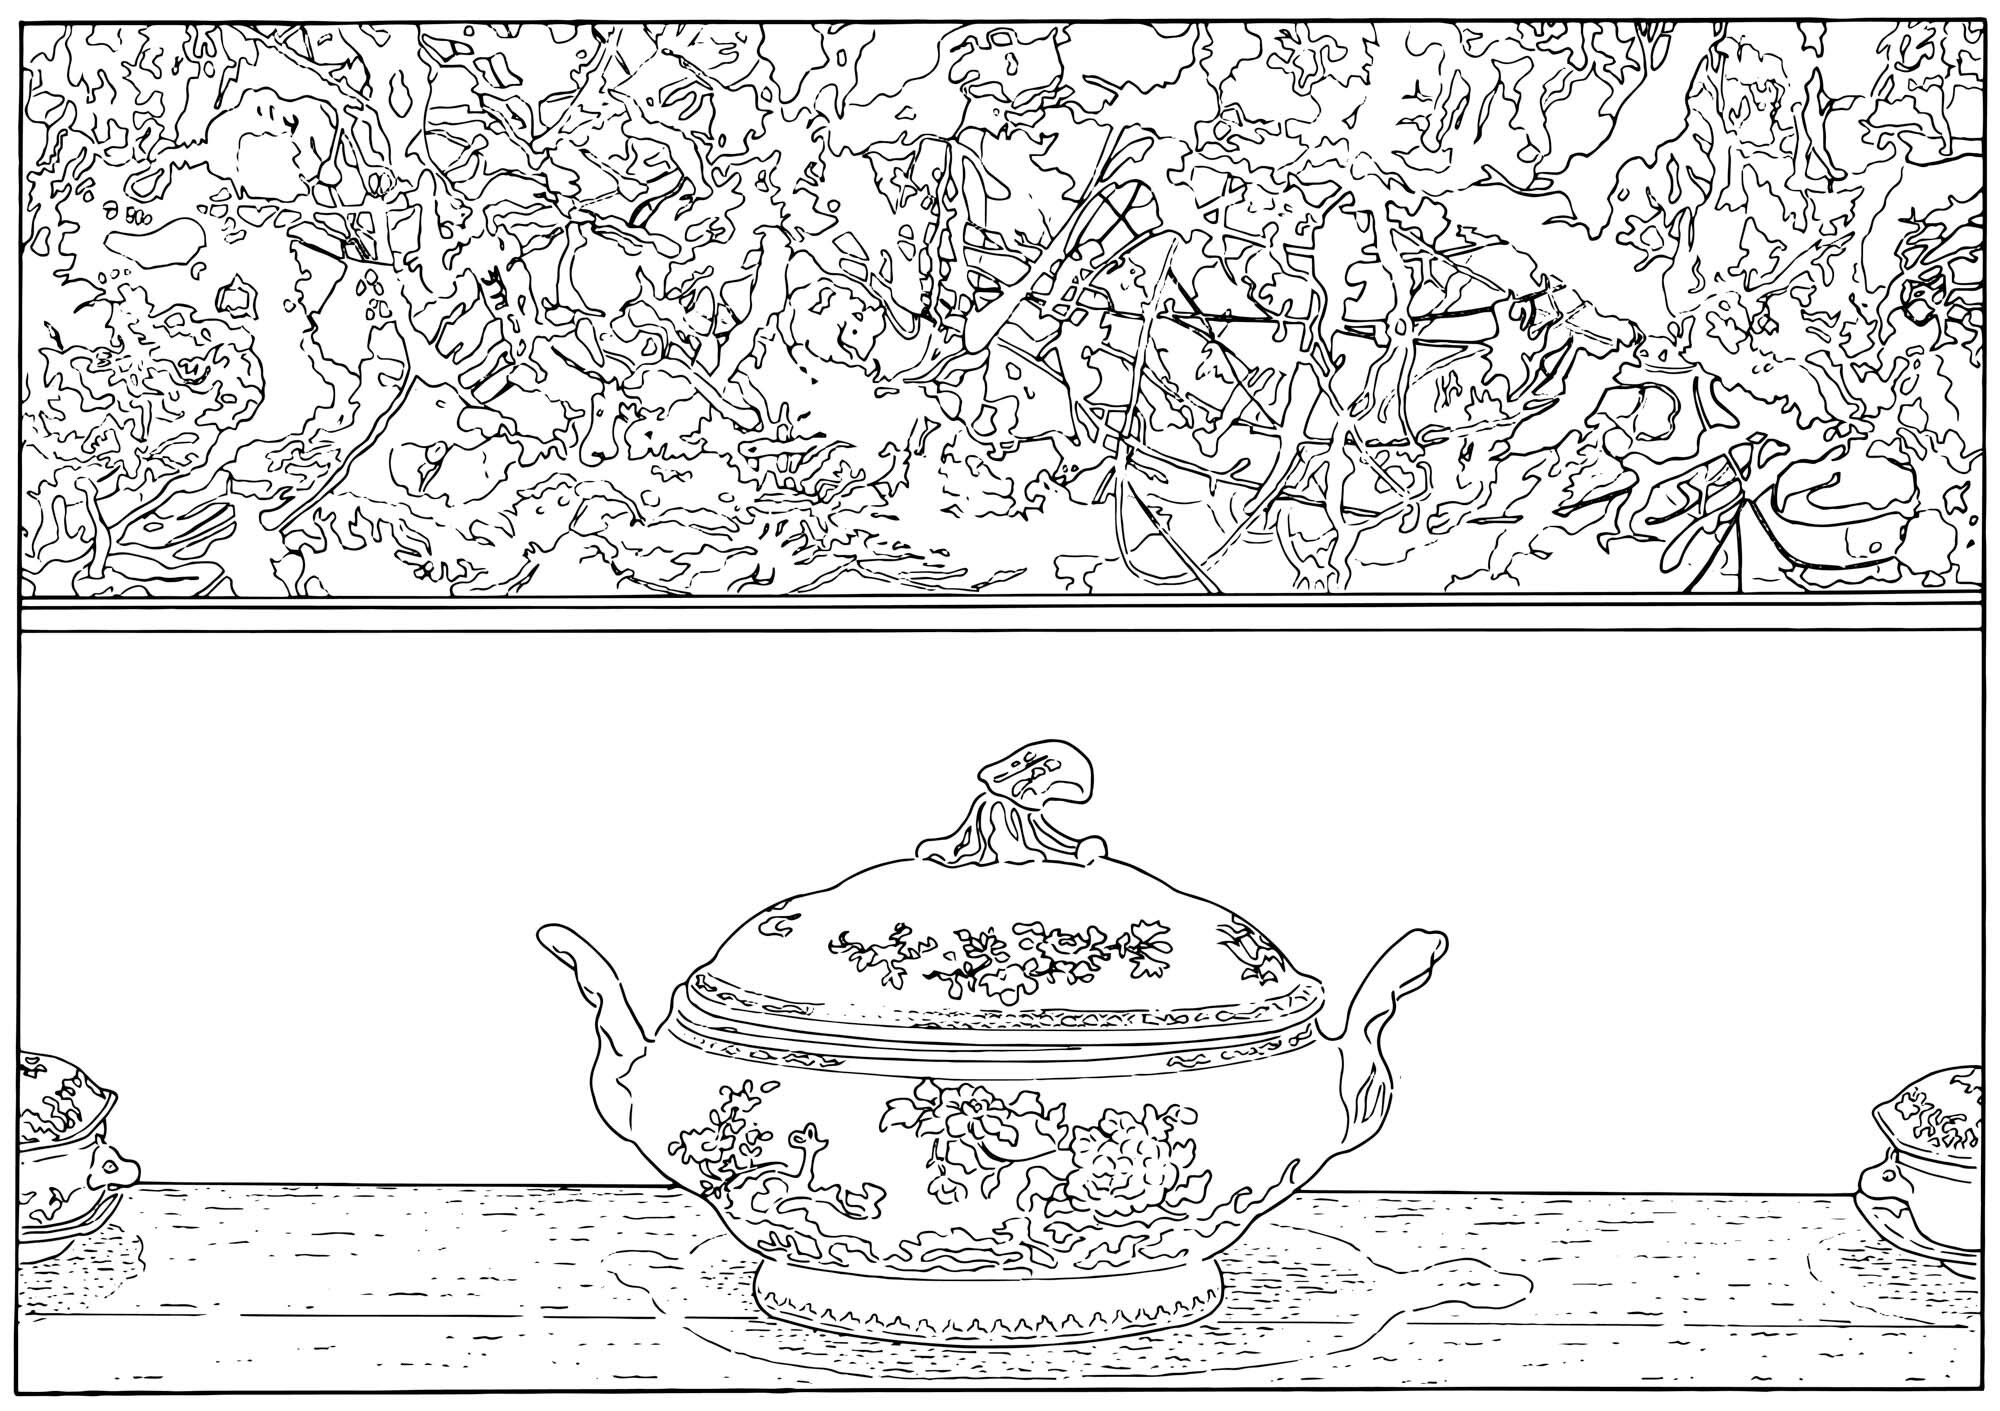 Louise Lawler, Pollock and Tureen (traced), 1984/2013